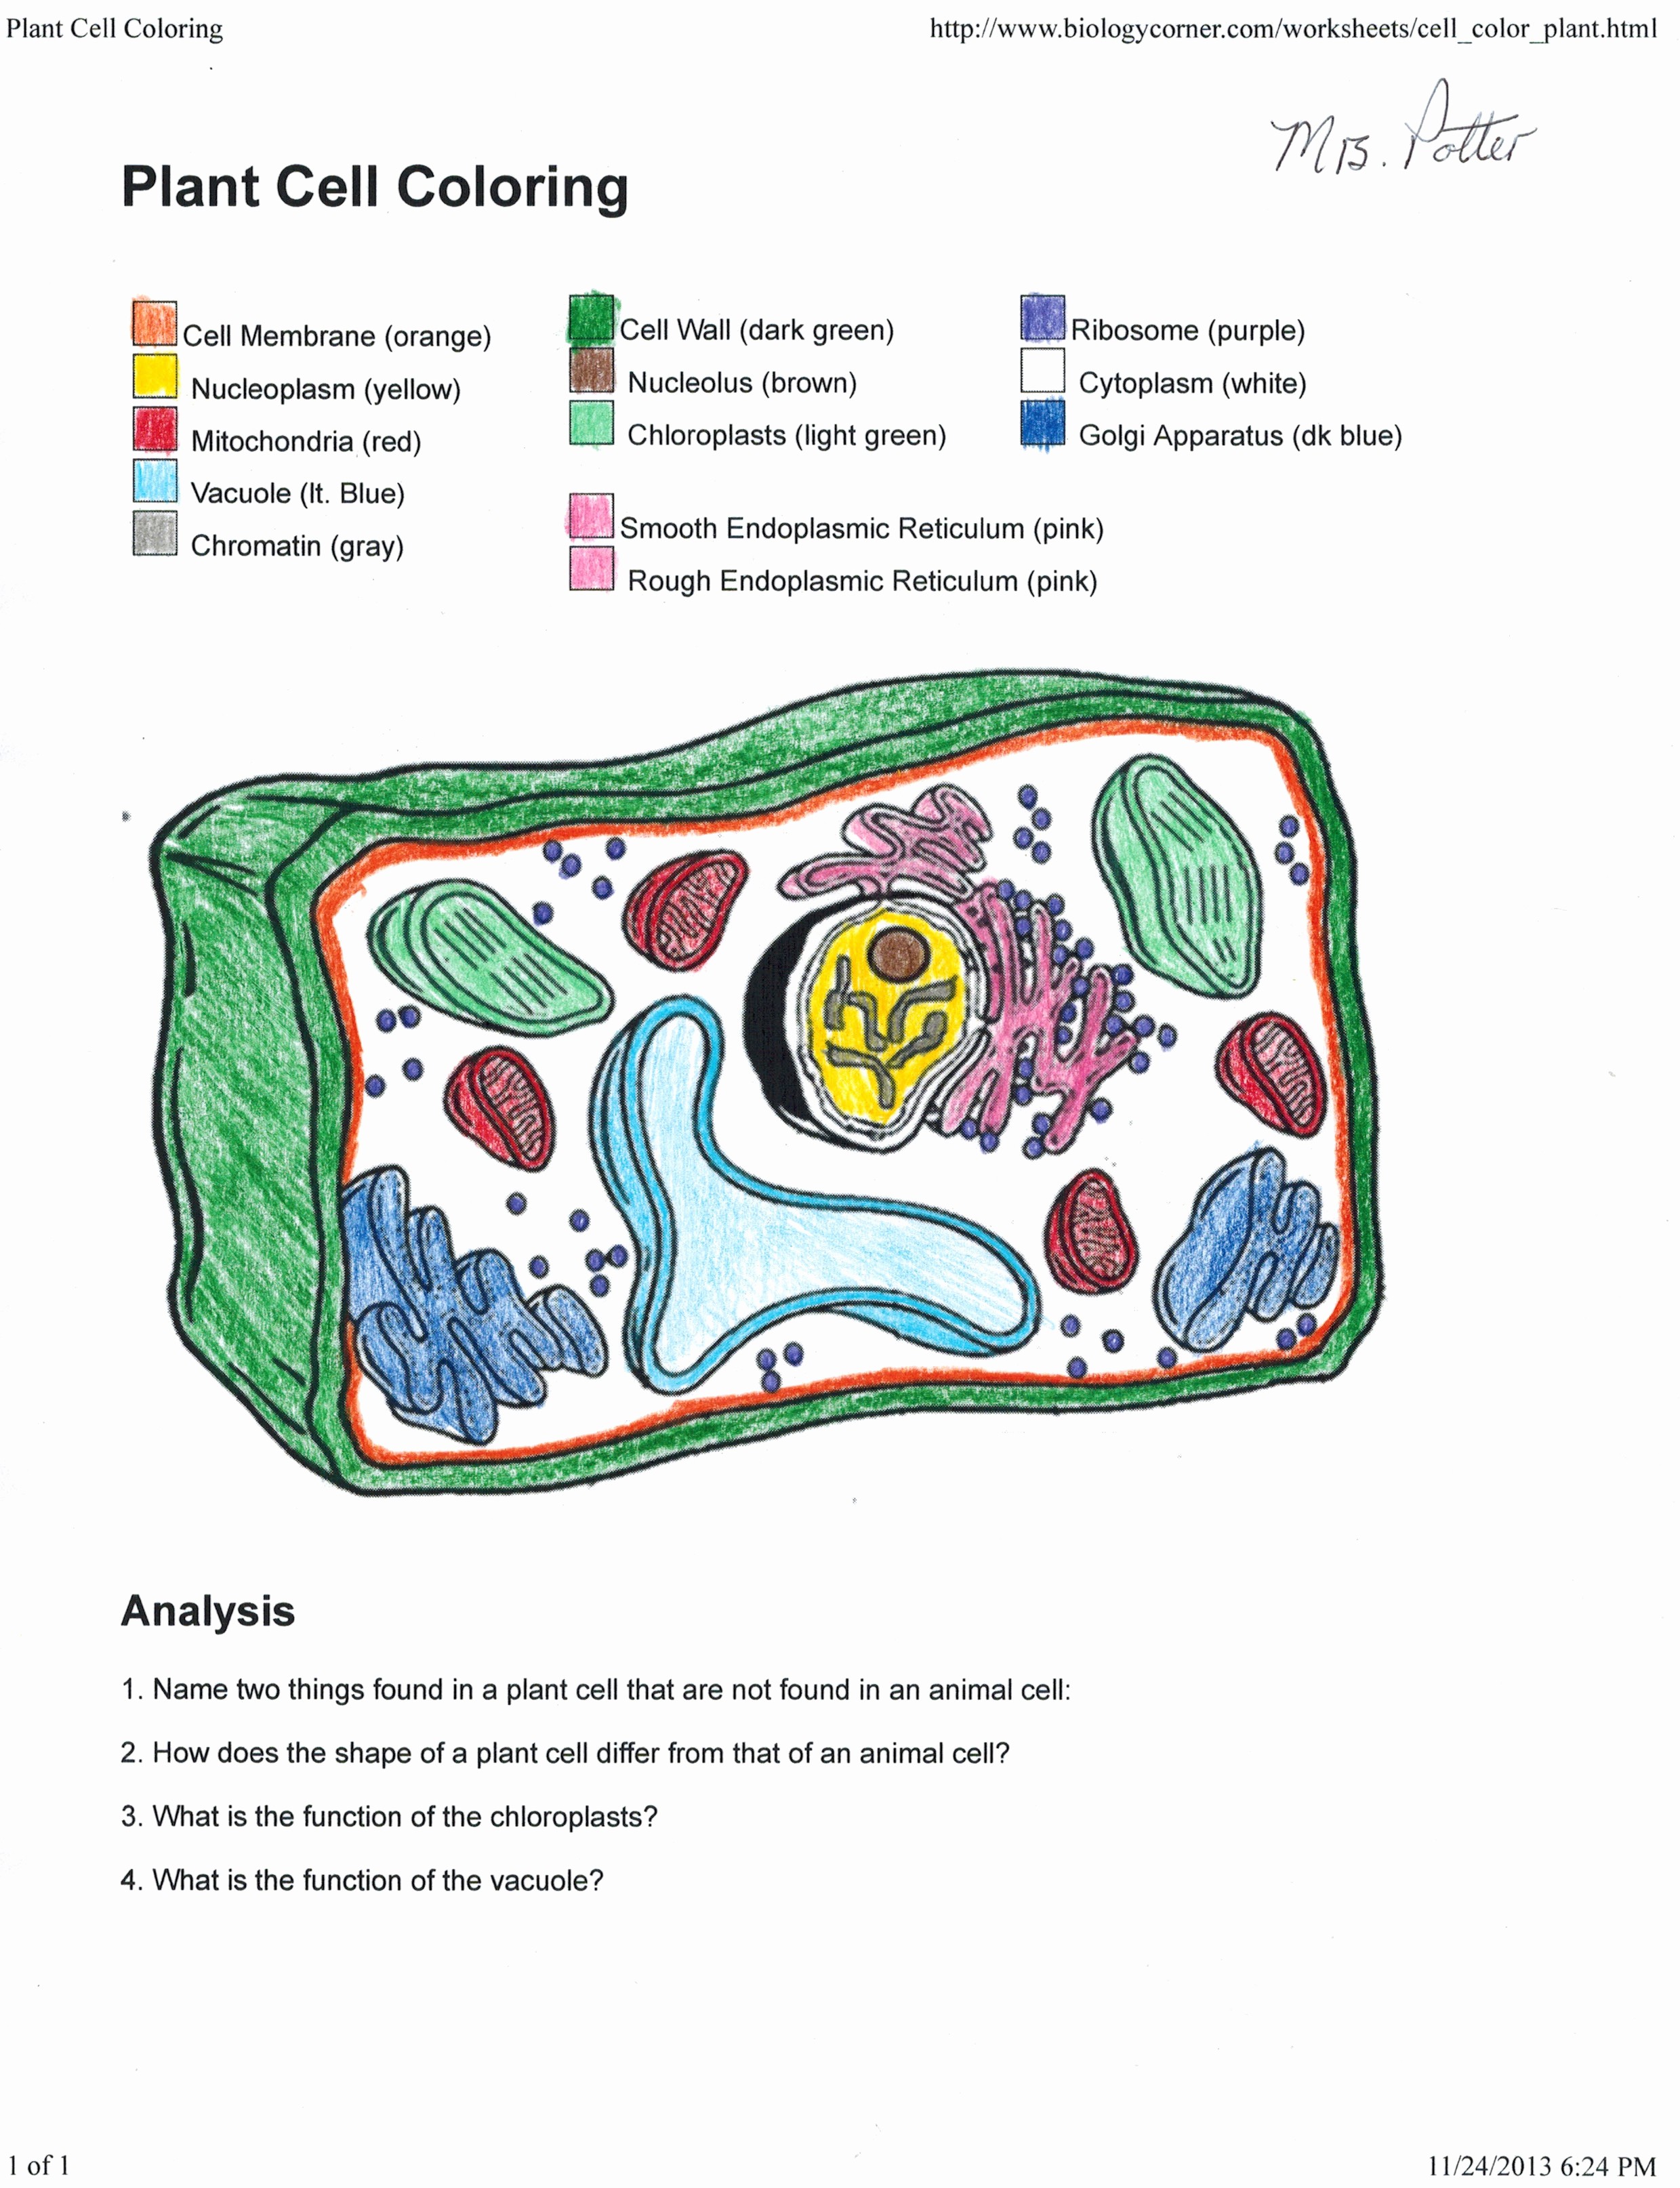 Animal Cell Coloring Sheet Beautiful Animal Cell And Labels Inspirational Life Science For 7th Grade